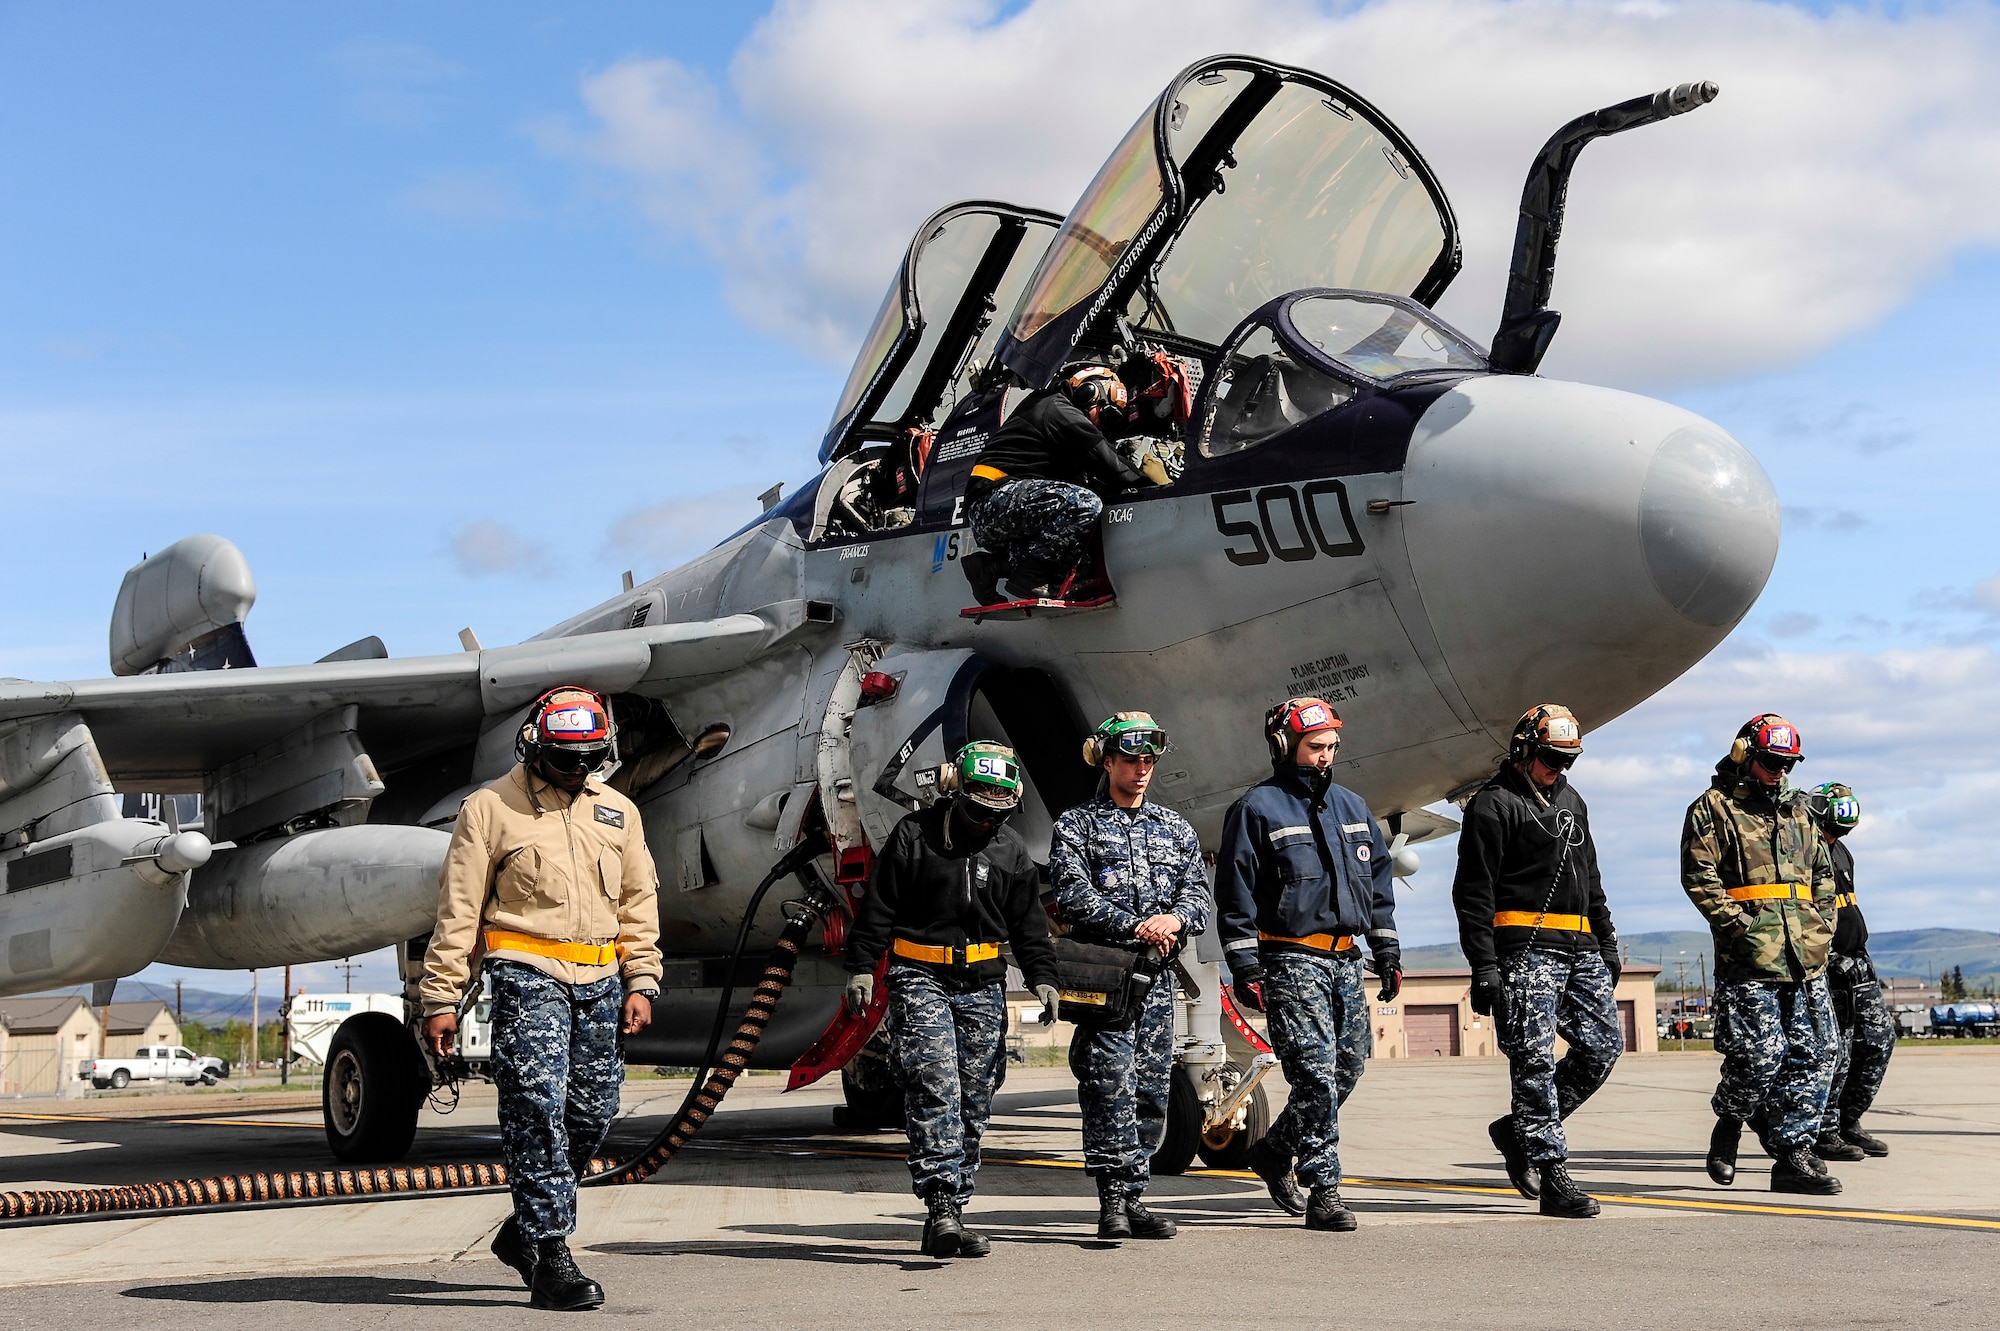 U.S. Navy EA-6B Prowler crew chiefs from the Electronic Attack Squadron 142, Naval Air Station Whidbey Island, Oak Harbor, Wash., perform a foreign object debris walk May 21, 2014, Eielson Air Force Base, Alaska. VAQ-142 is participating in RED FLAG-Alaska 14-1, the first of four RF-A exercises for 2014. (U.S. Air Force photo by Senior Airman Zachary Perras/Released)